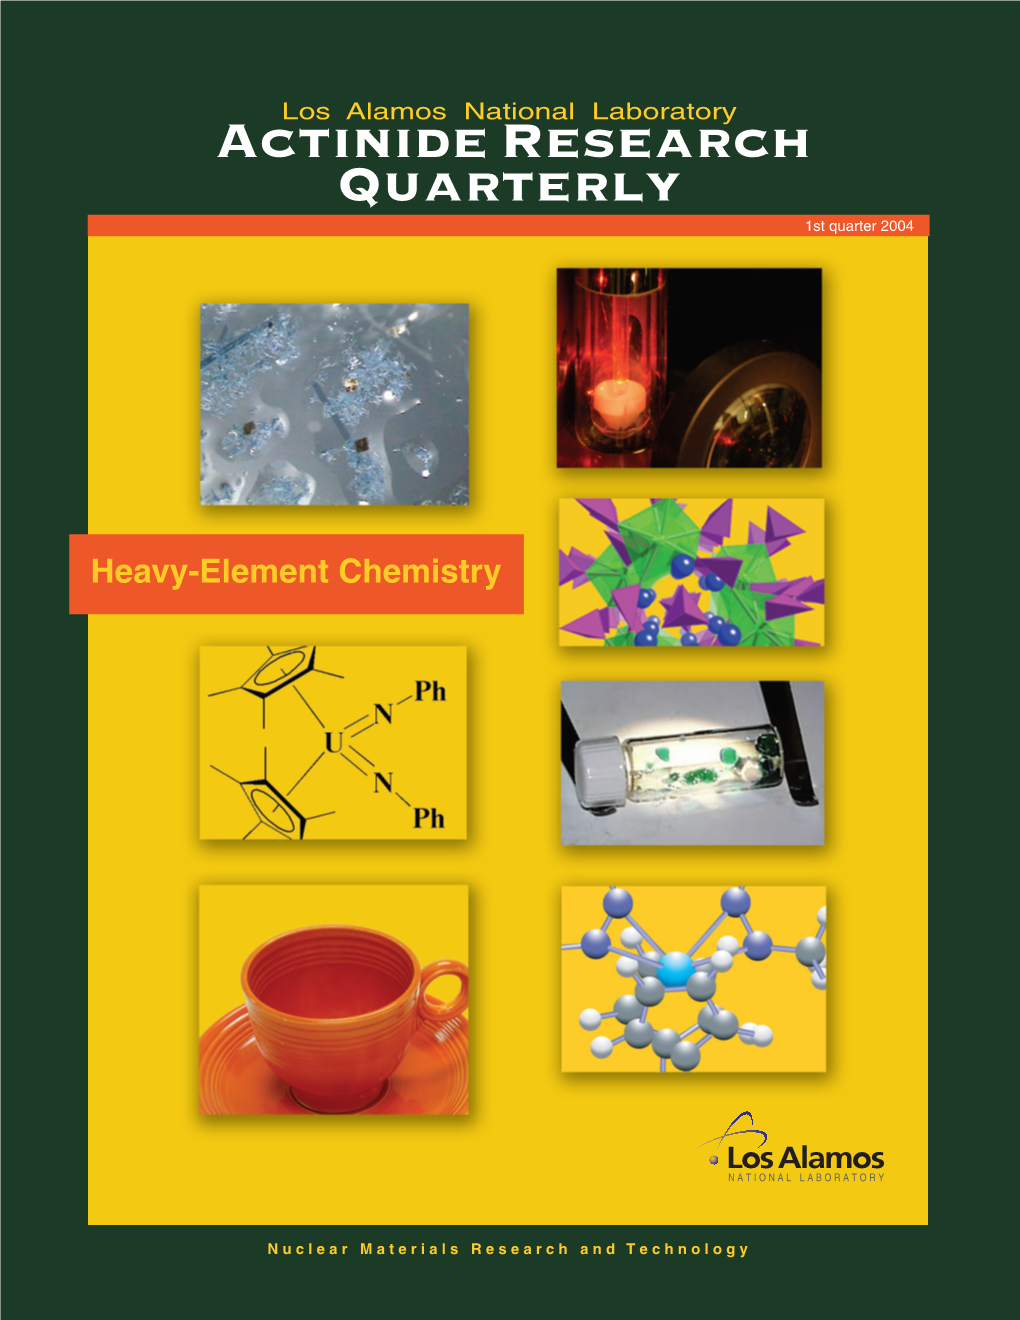 Quarterly Actinide Research